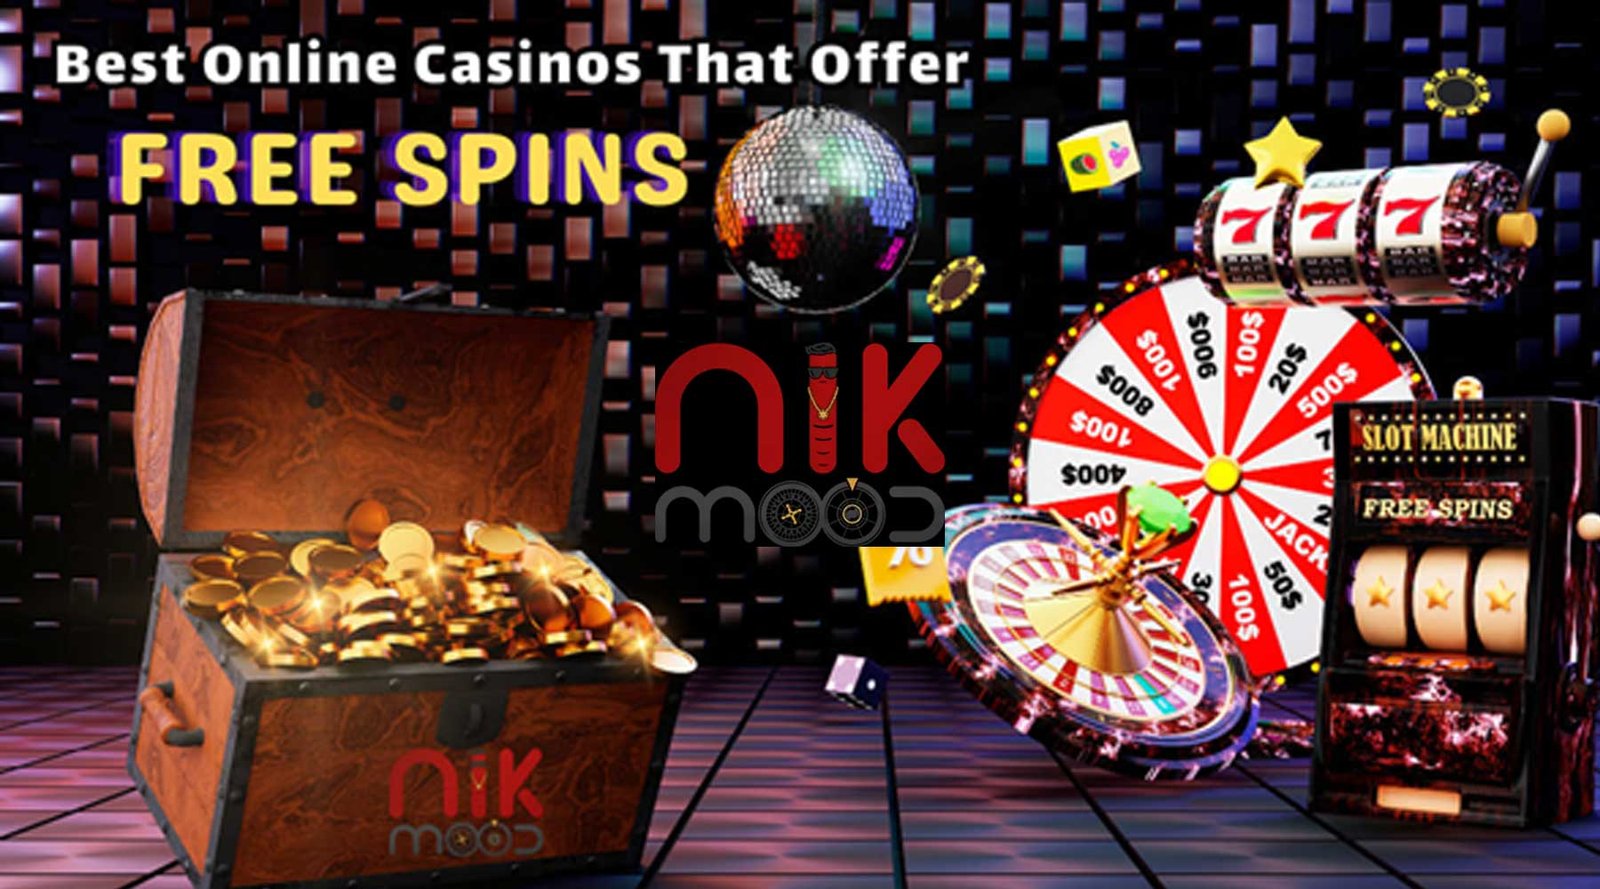 What Casinos Give Free Spins?